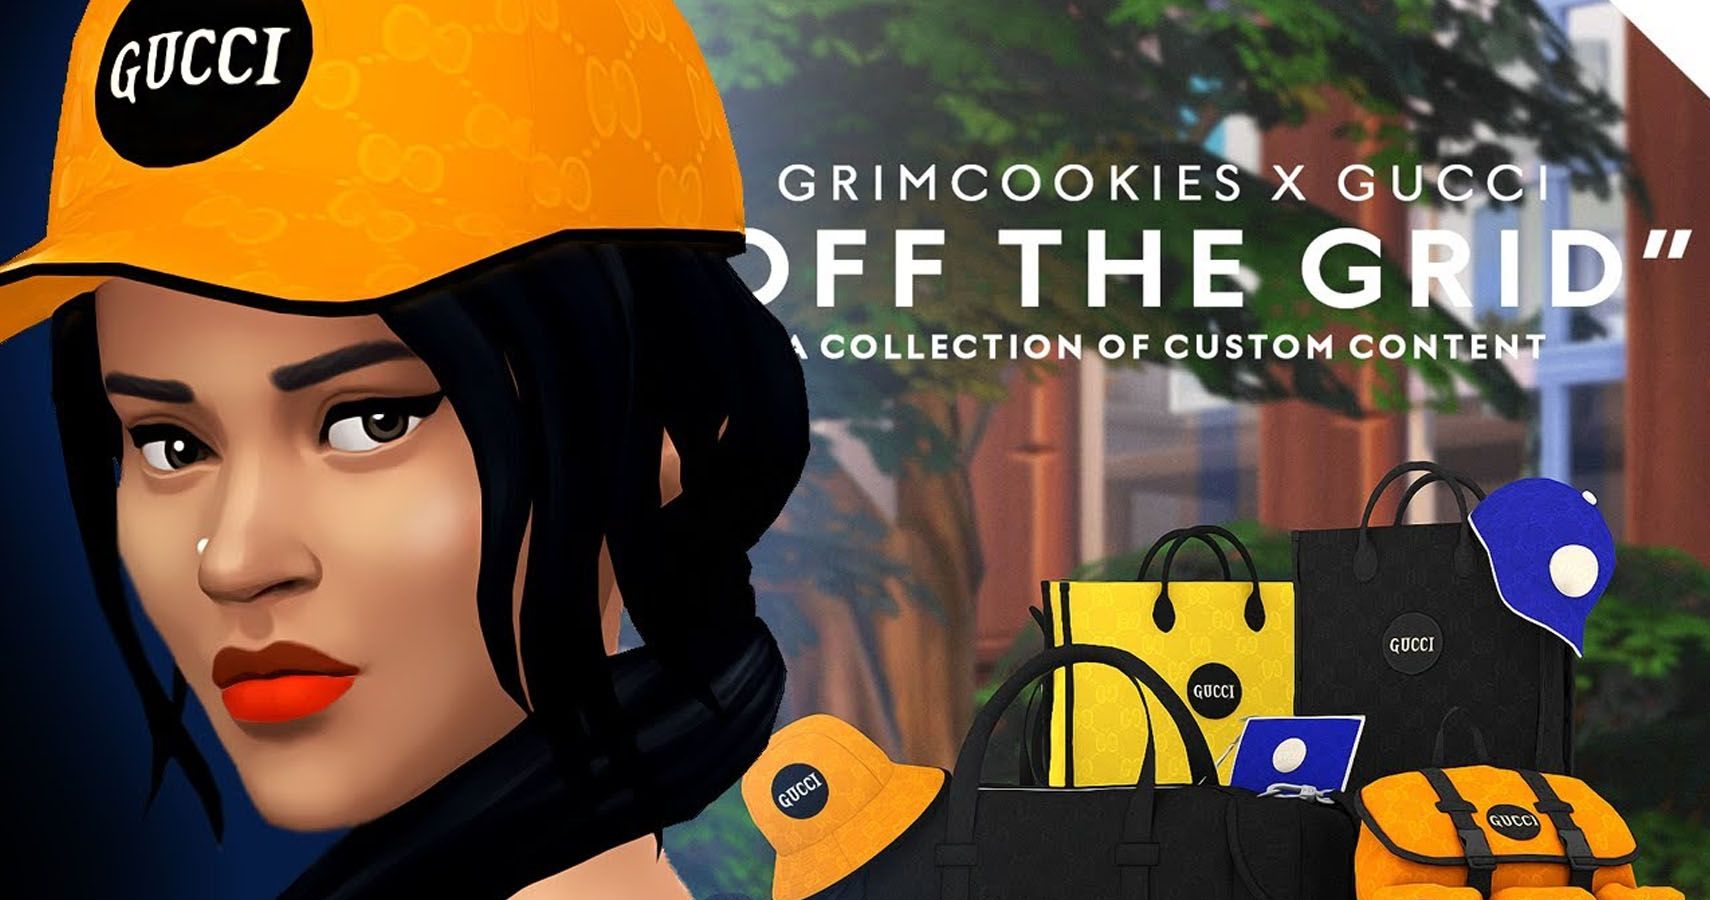 grimcookies gucci collection advert